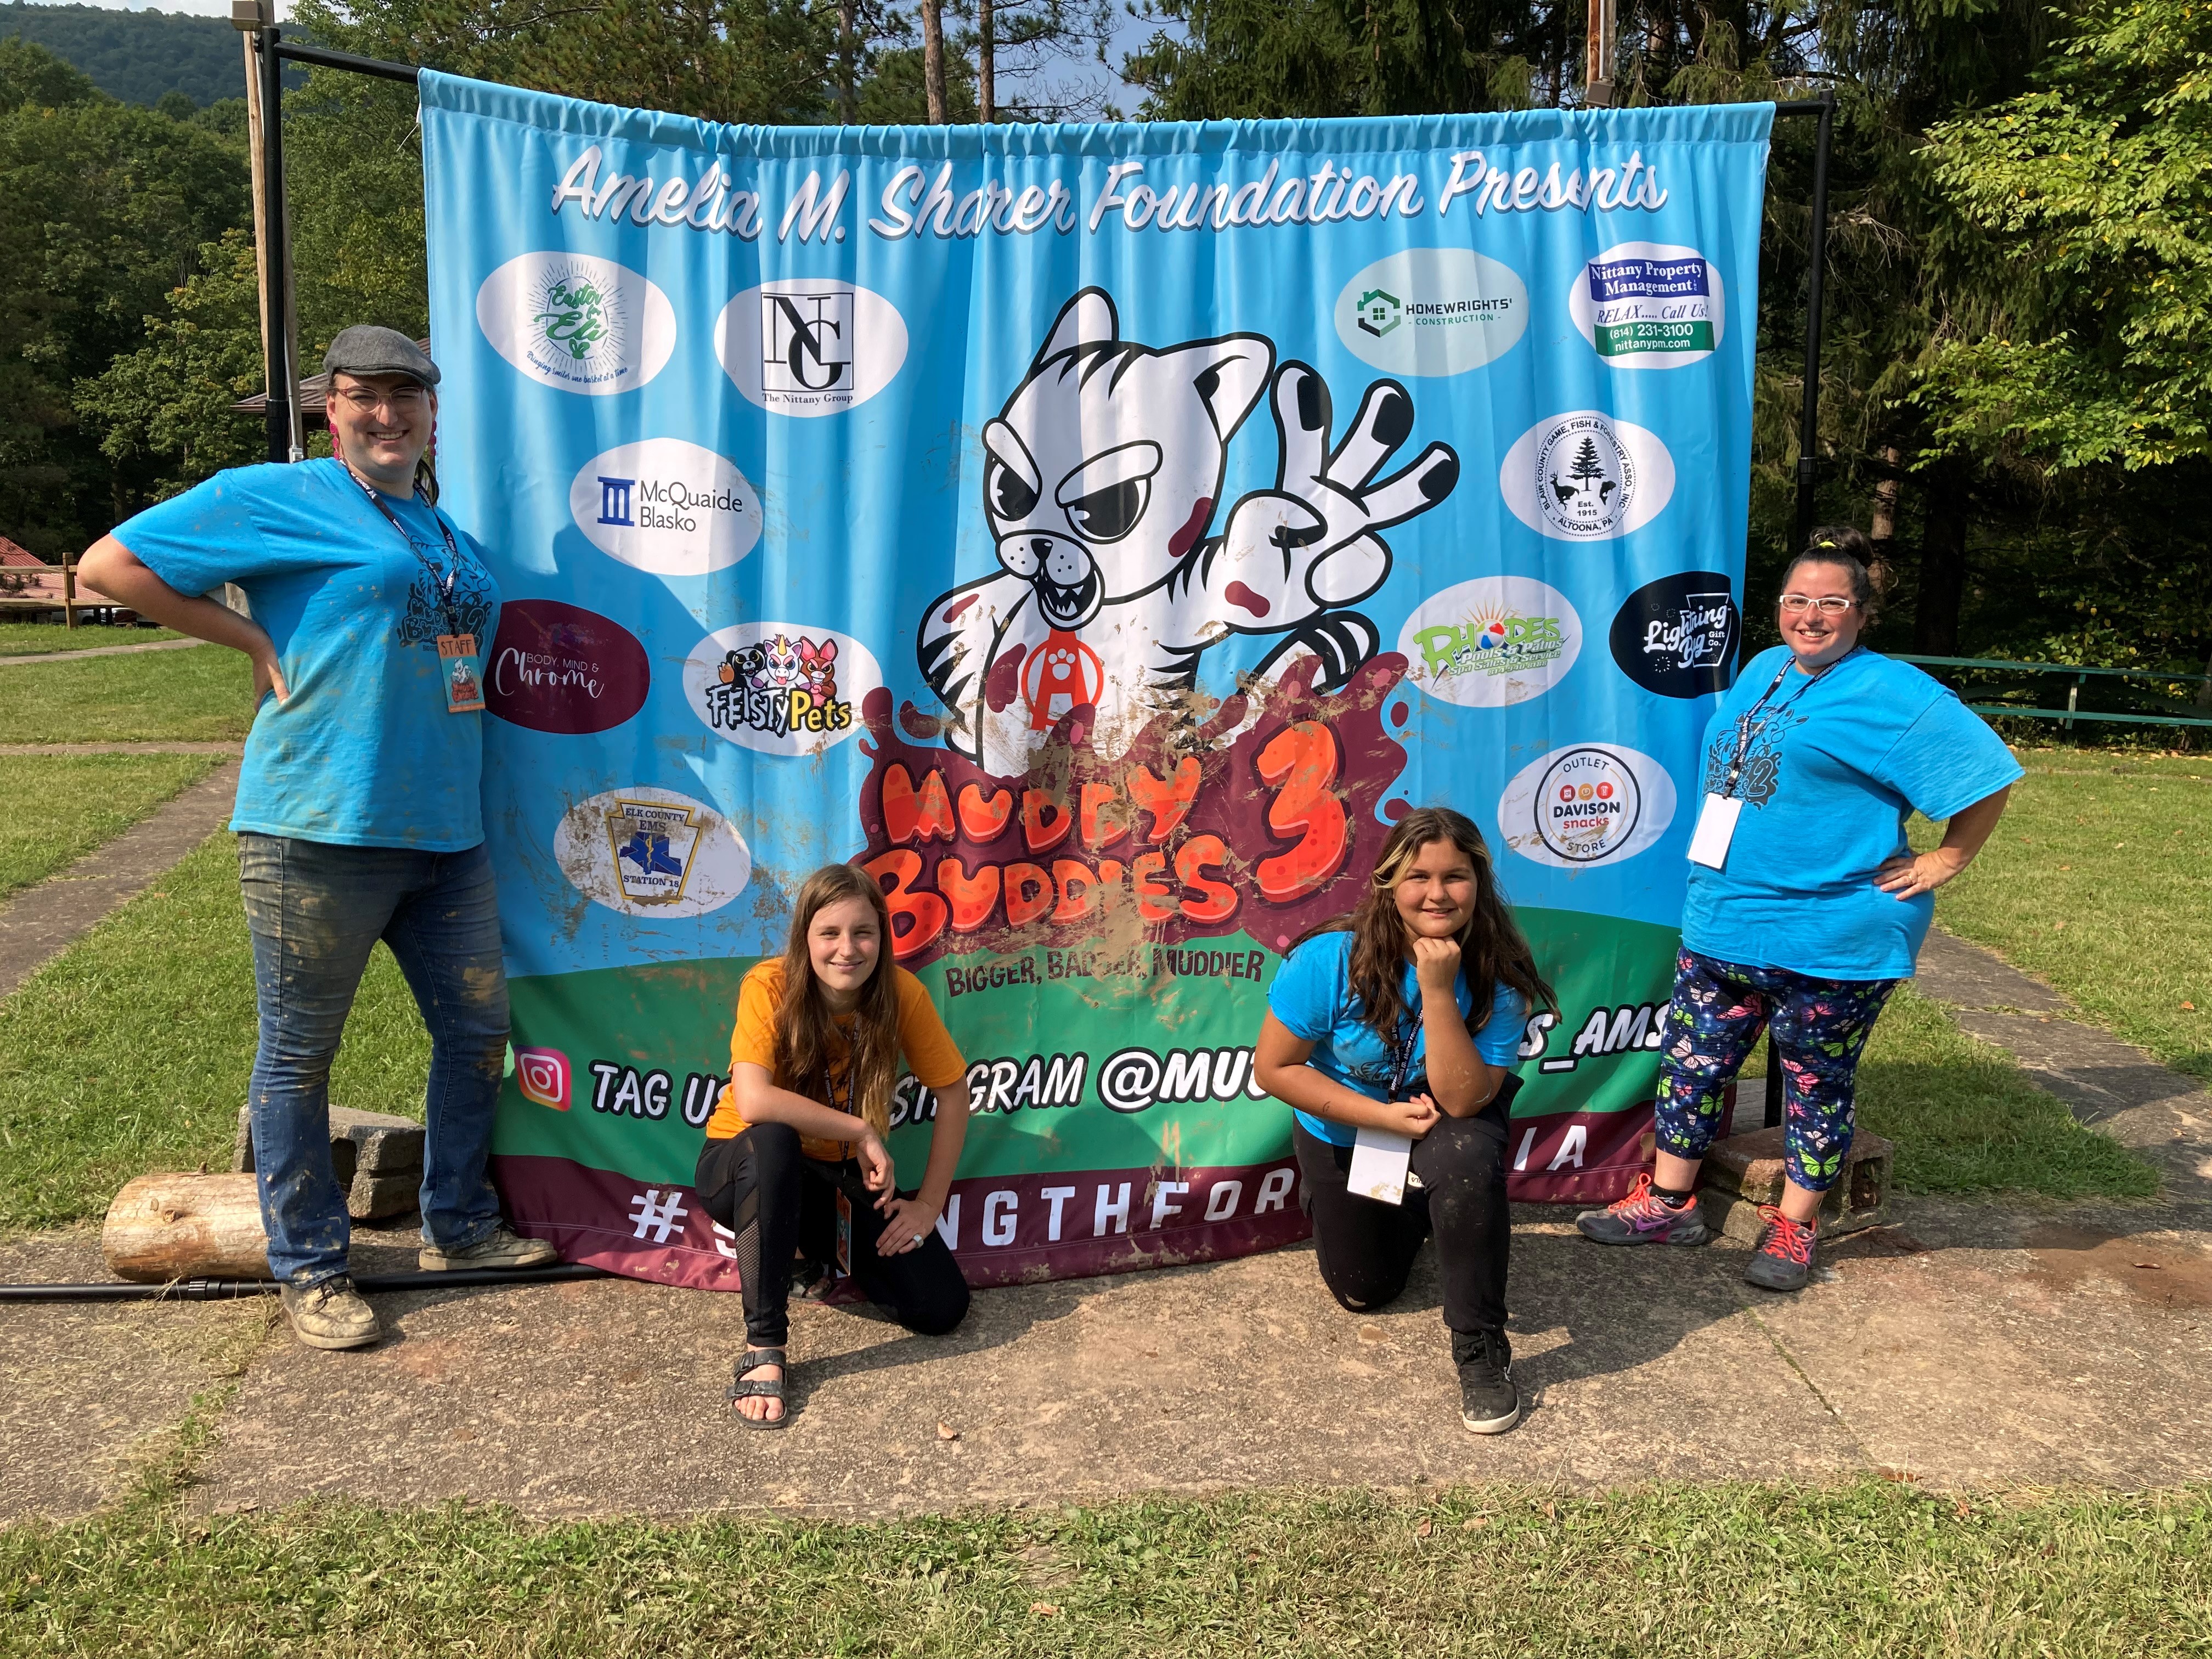 McQuaide Blasko was a proud sponsor of the Amelia M. Sharer Foundation’s 3rd Annual Muddy Buddies, kids run & obstacle course on September 17, 2022